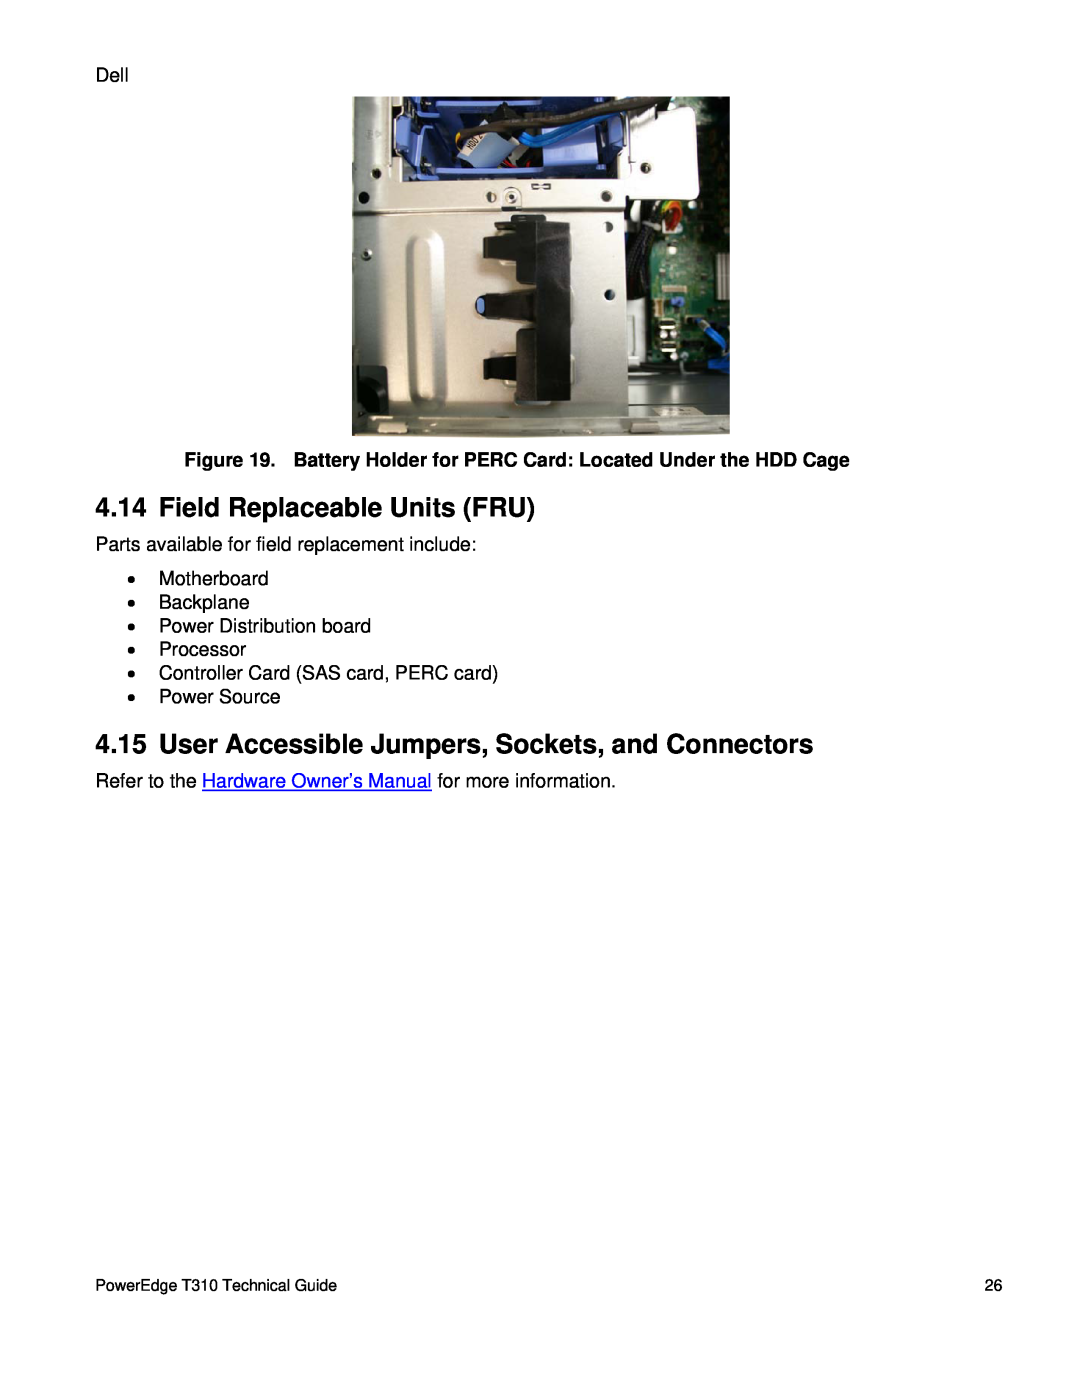 Dell Field Replaceable Units FRU, User Accessible Jumpers, Sockets, and Connectors, PowerEdge T310 Technical Guide 